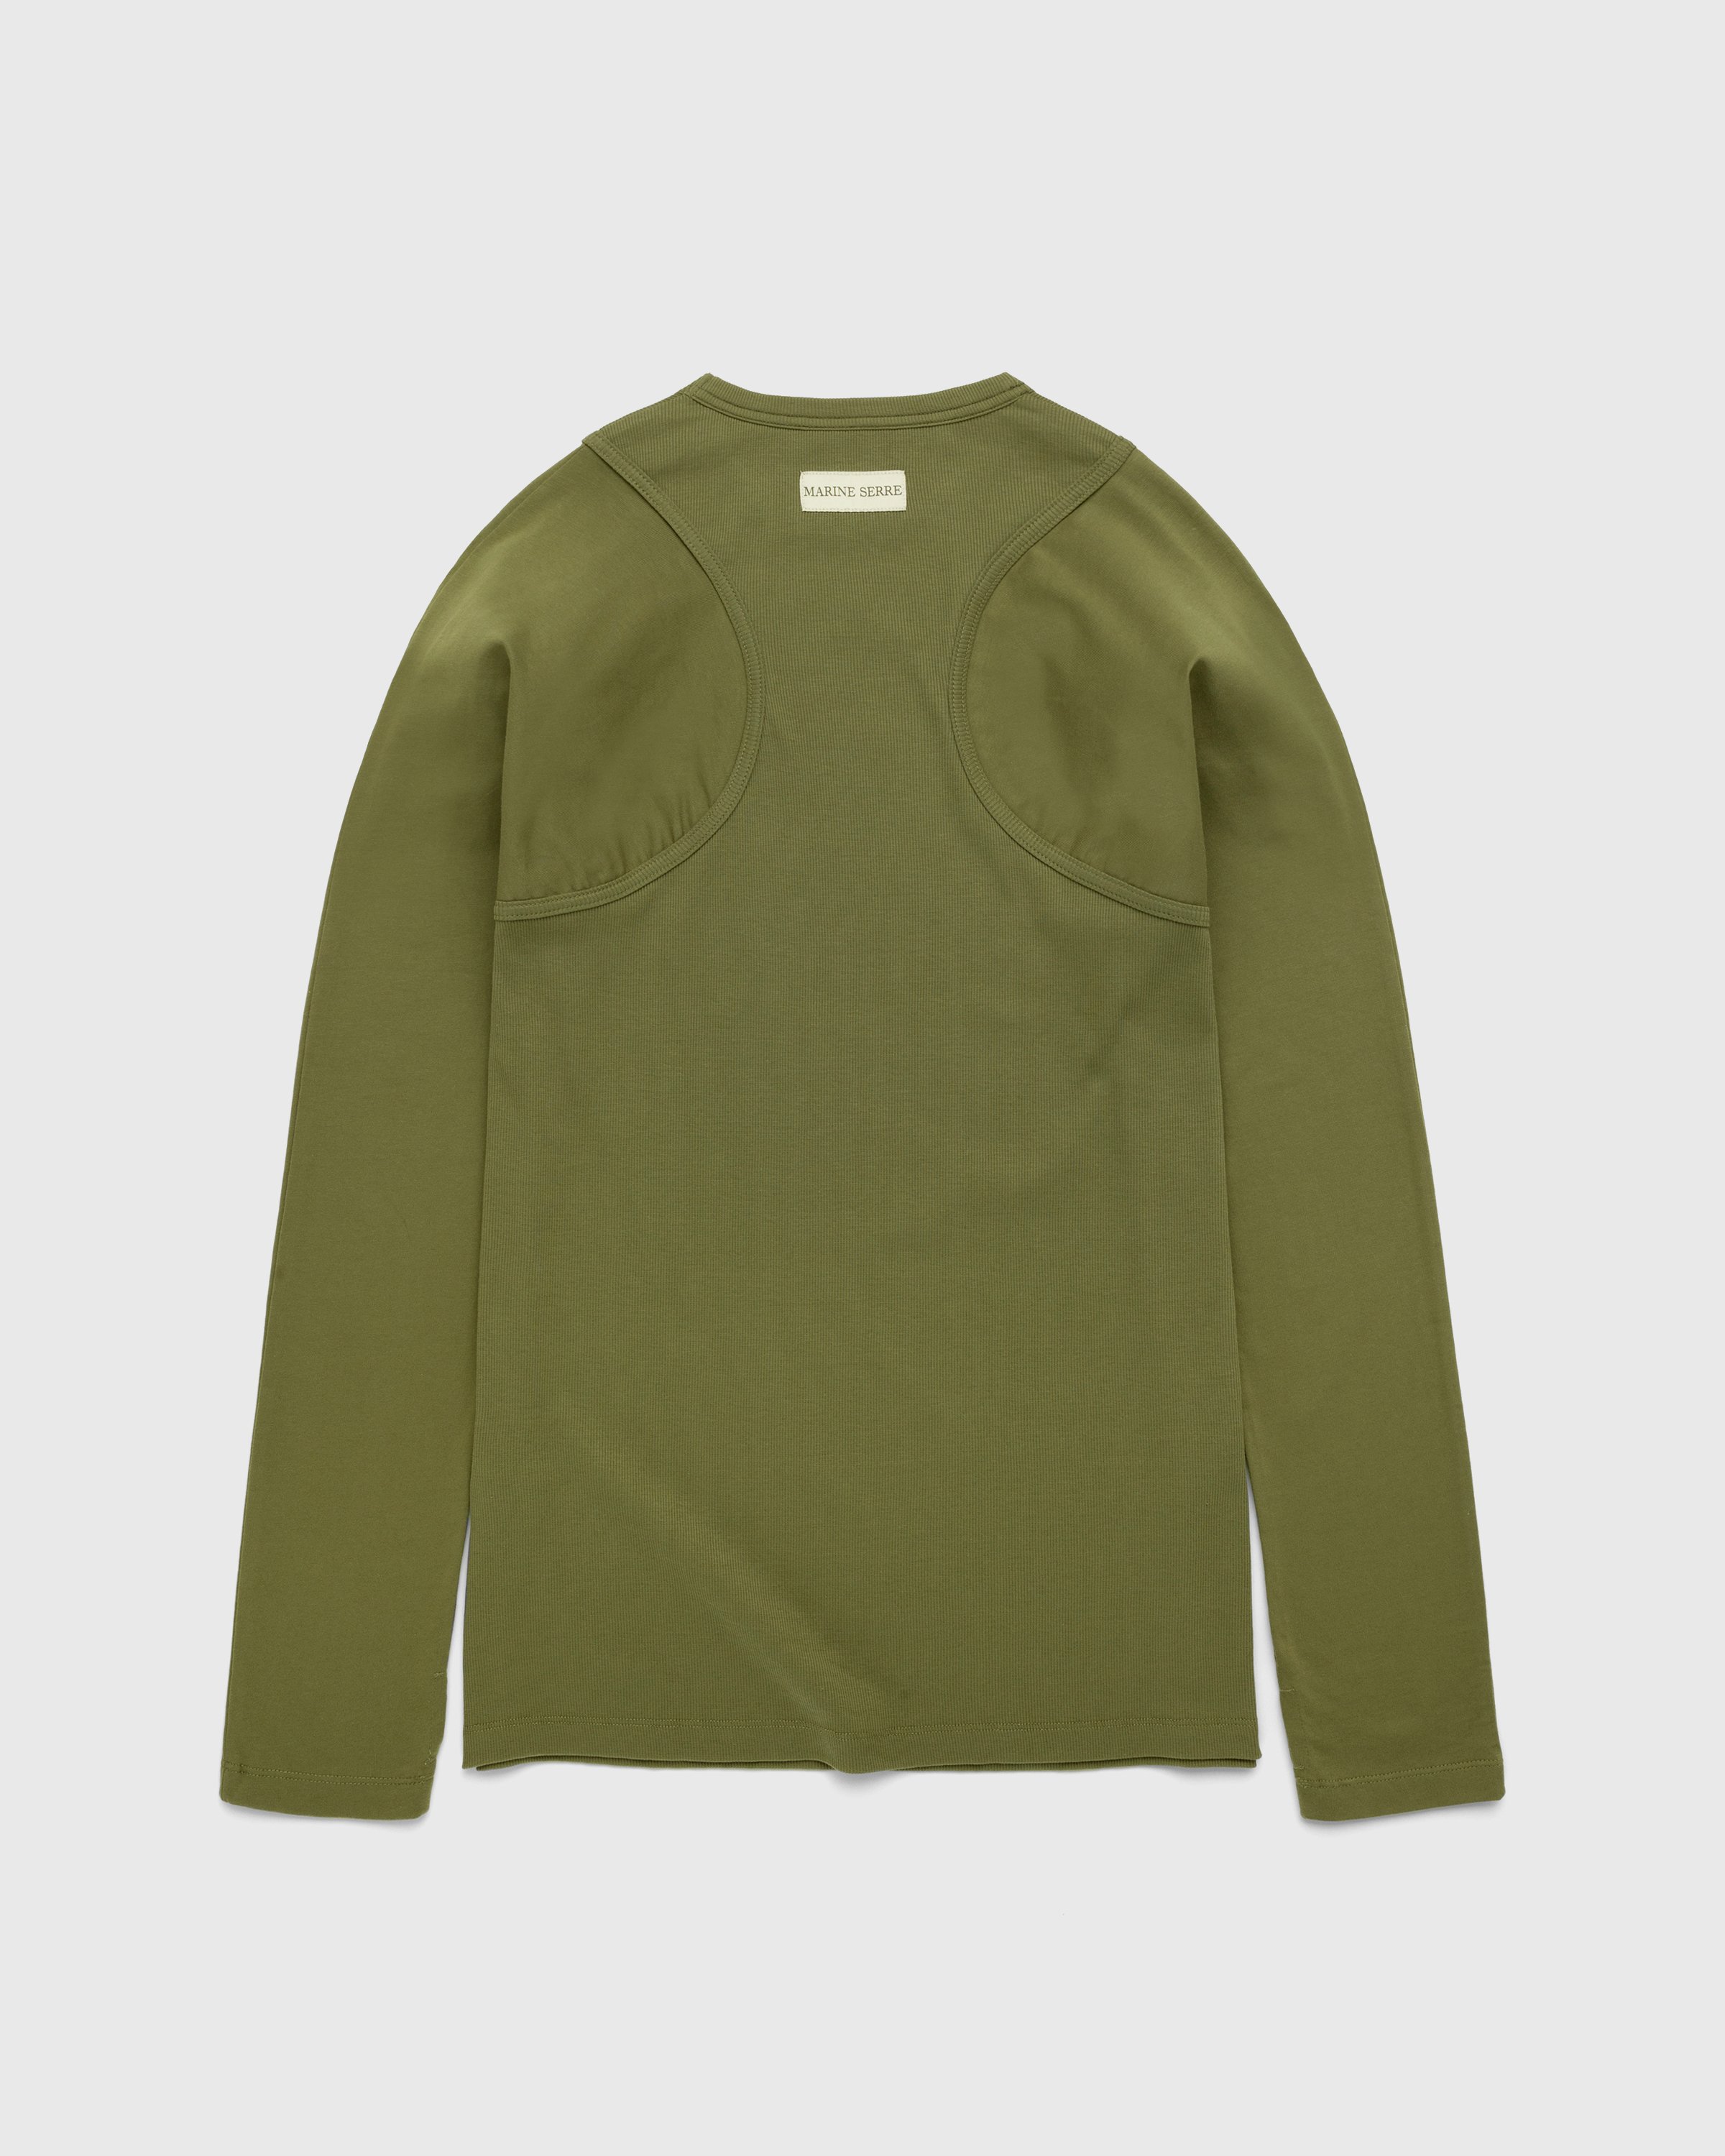 Marine Serre - Organic Cotton Relaxed Long-Sleeve Top Green - Clothing - Green - Image 3